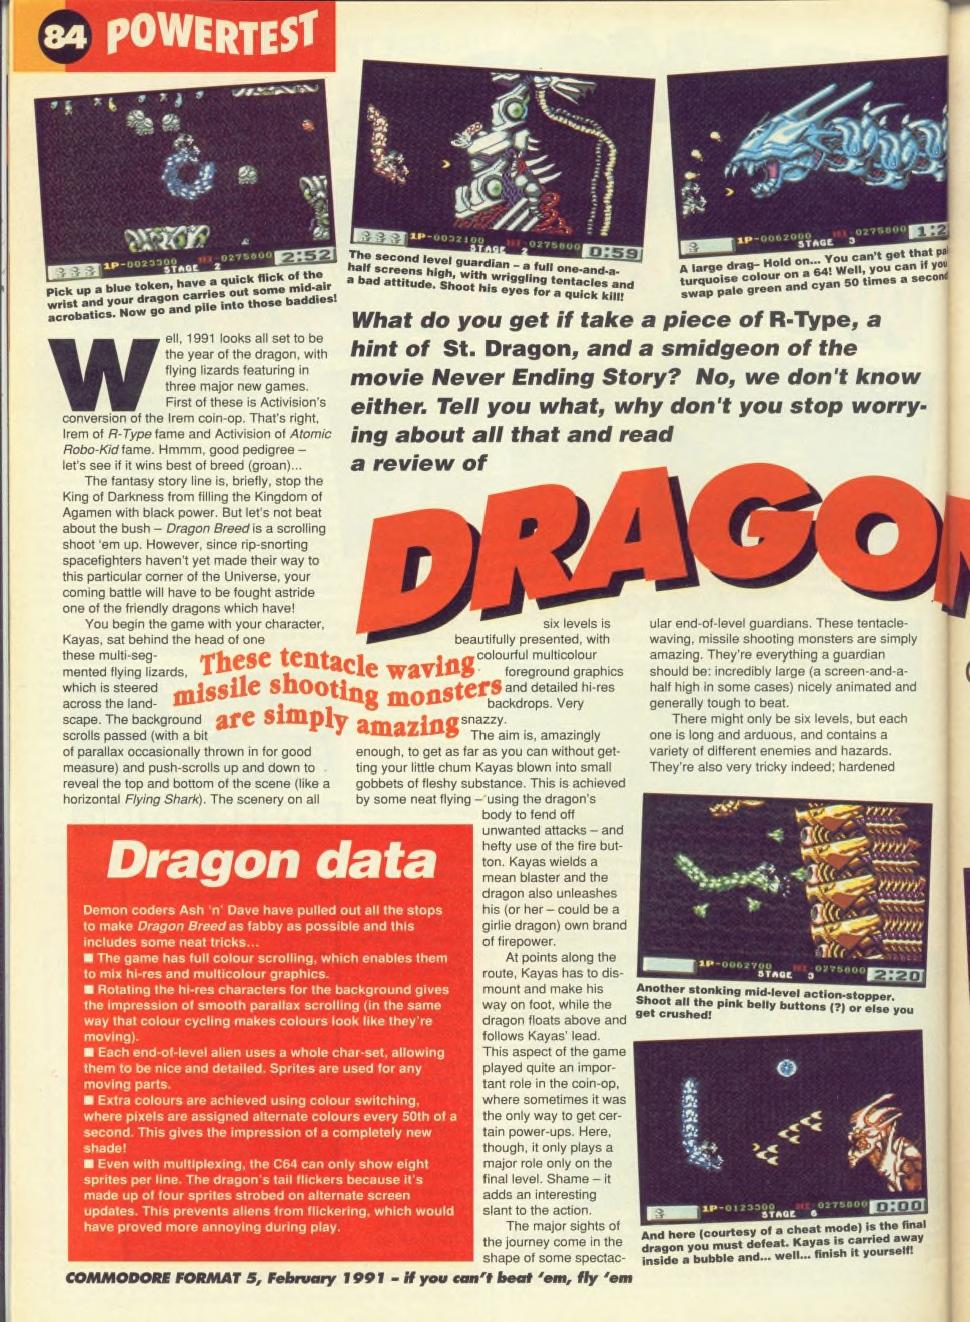 Commodore Format issue 5 page 84